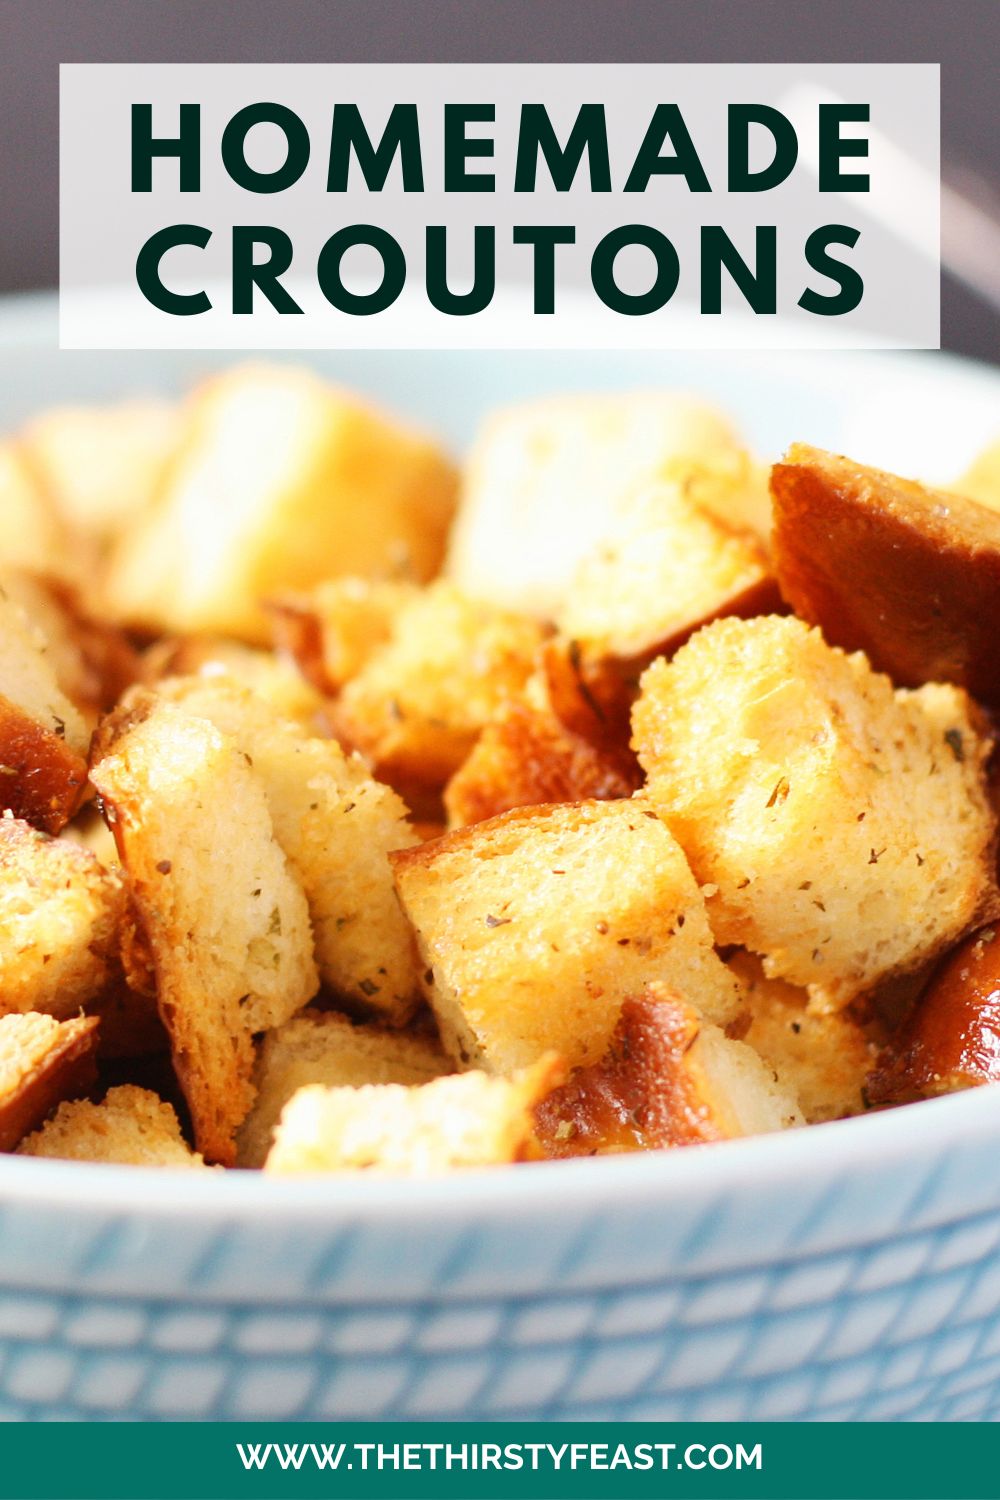 closeup image of crunchy homemade croutons for pinterest. Overlayed is text captioned "homemade croutons"